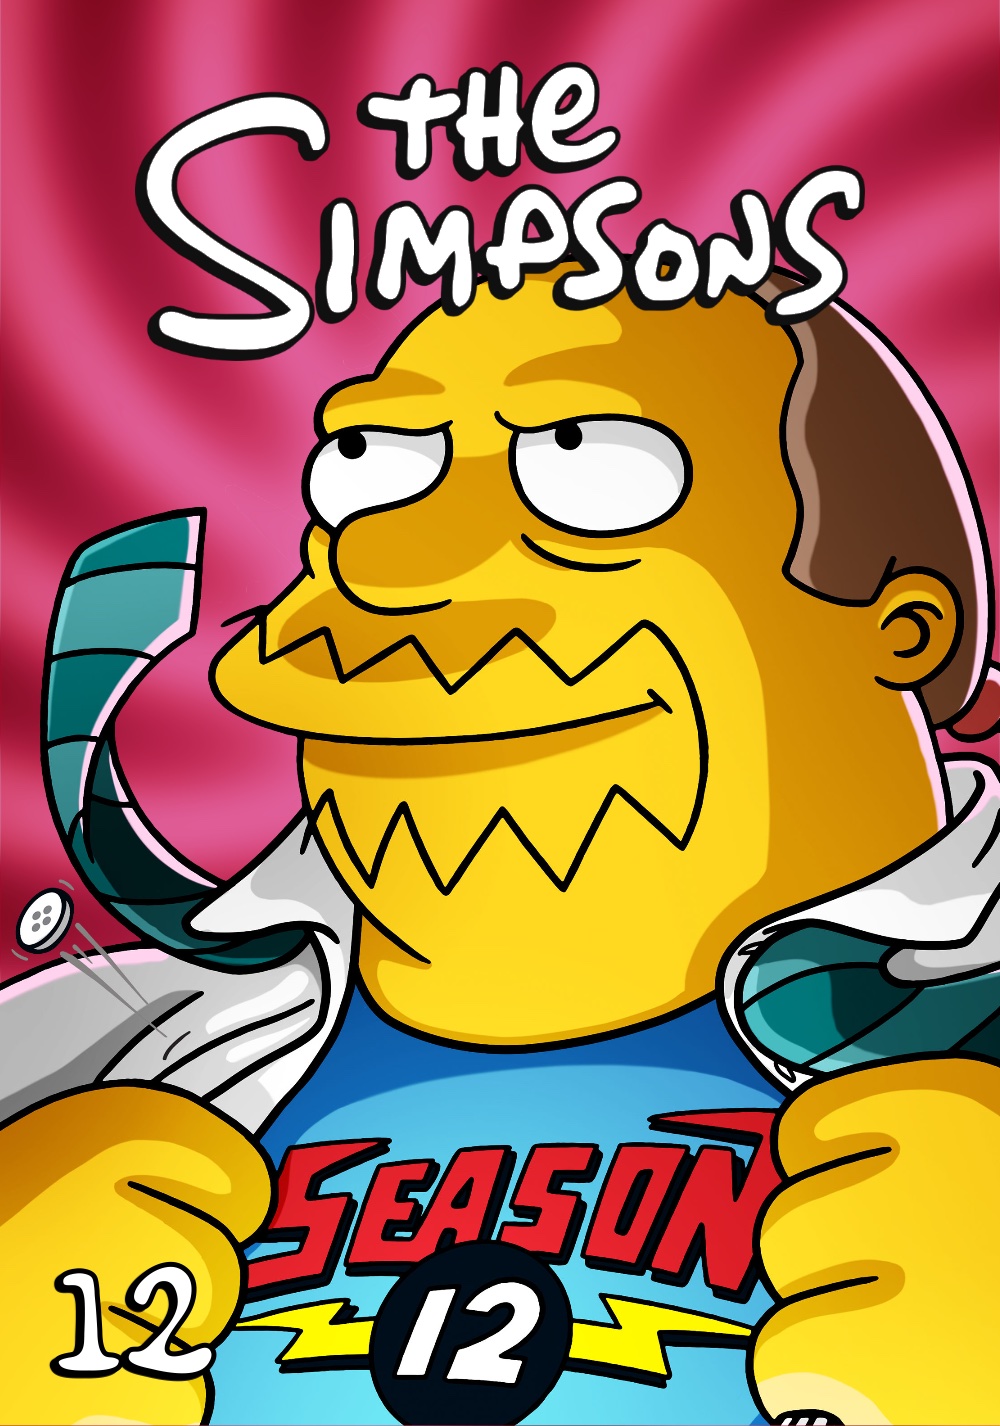 The Simpsons *Ultimate Collection* S12 (2000) BDRip 1080p HEVC 10-bit EAC3-5.1 MultiSub Retail